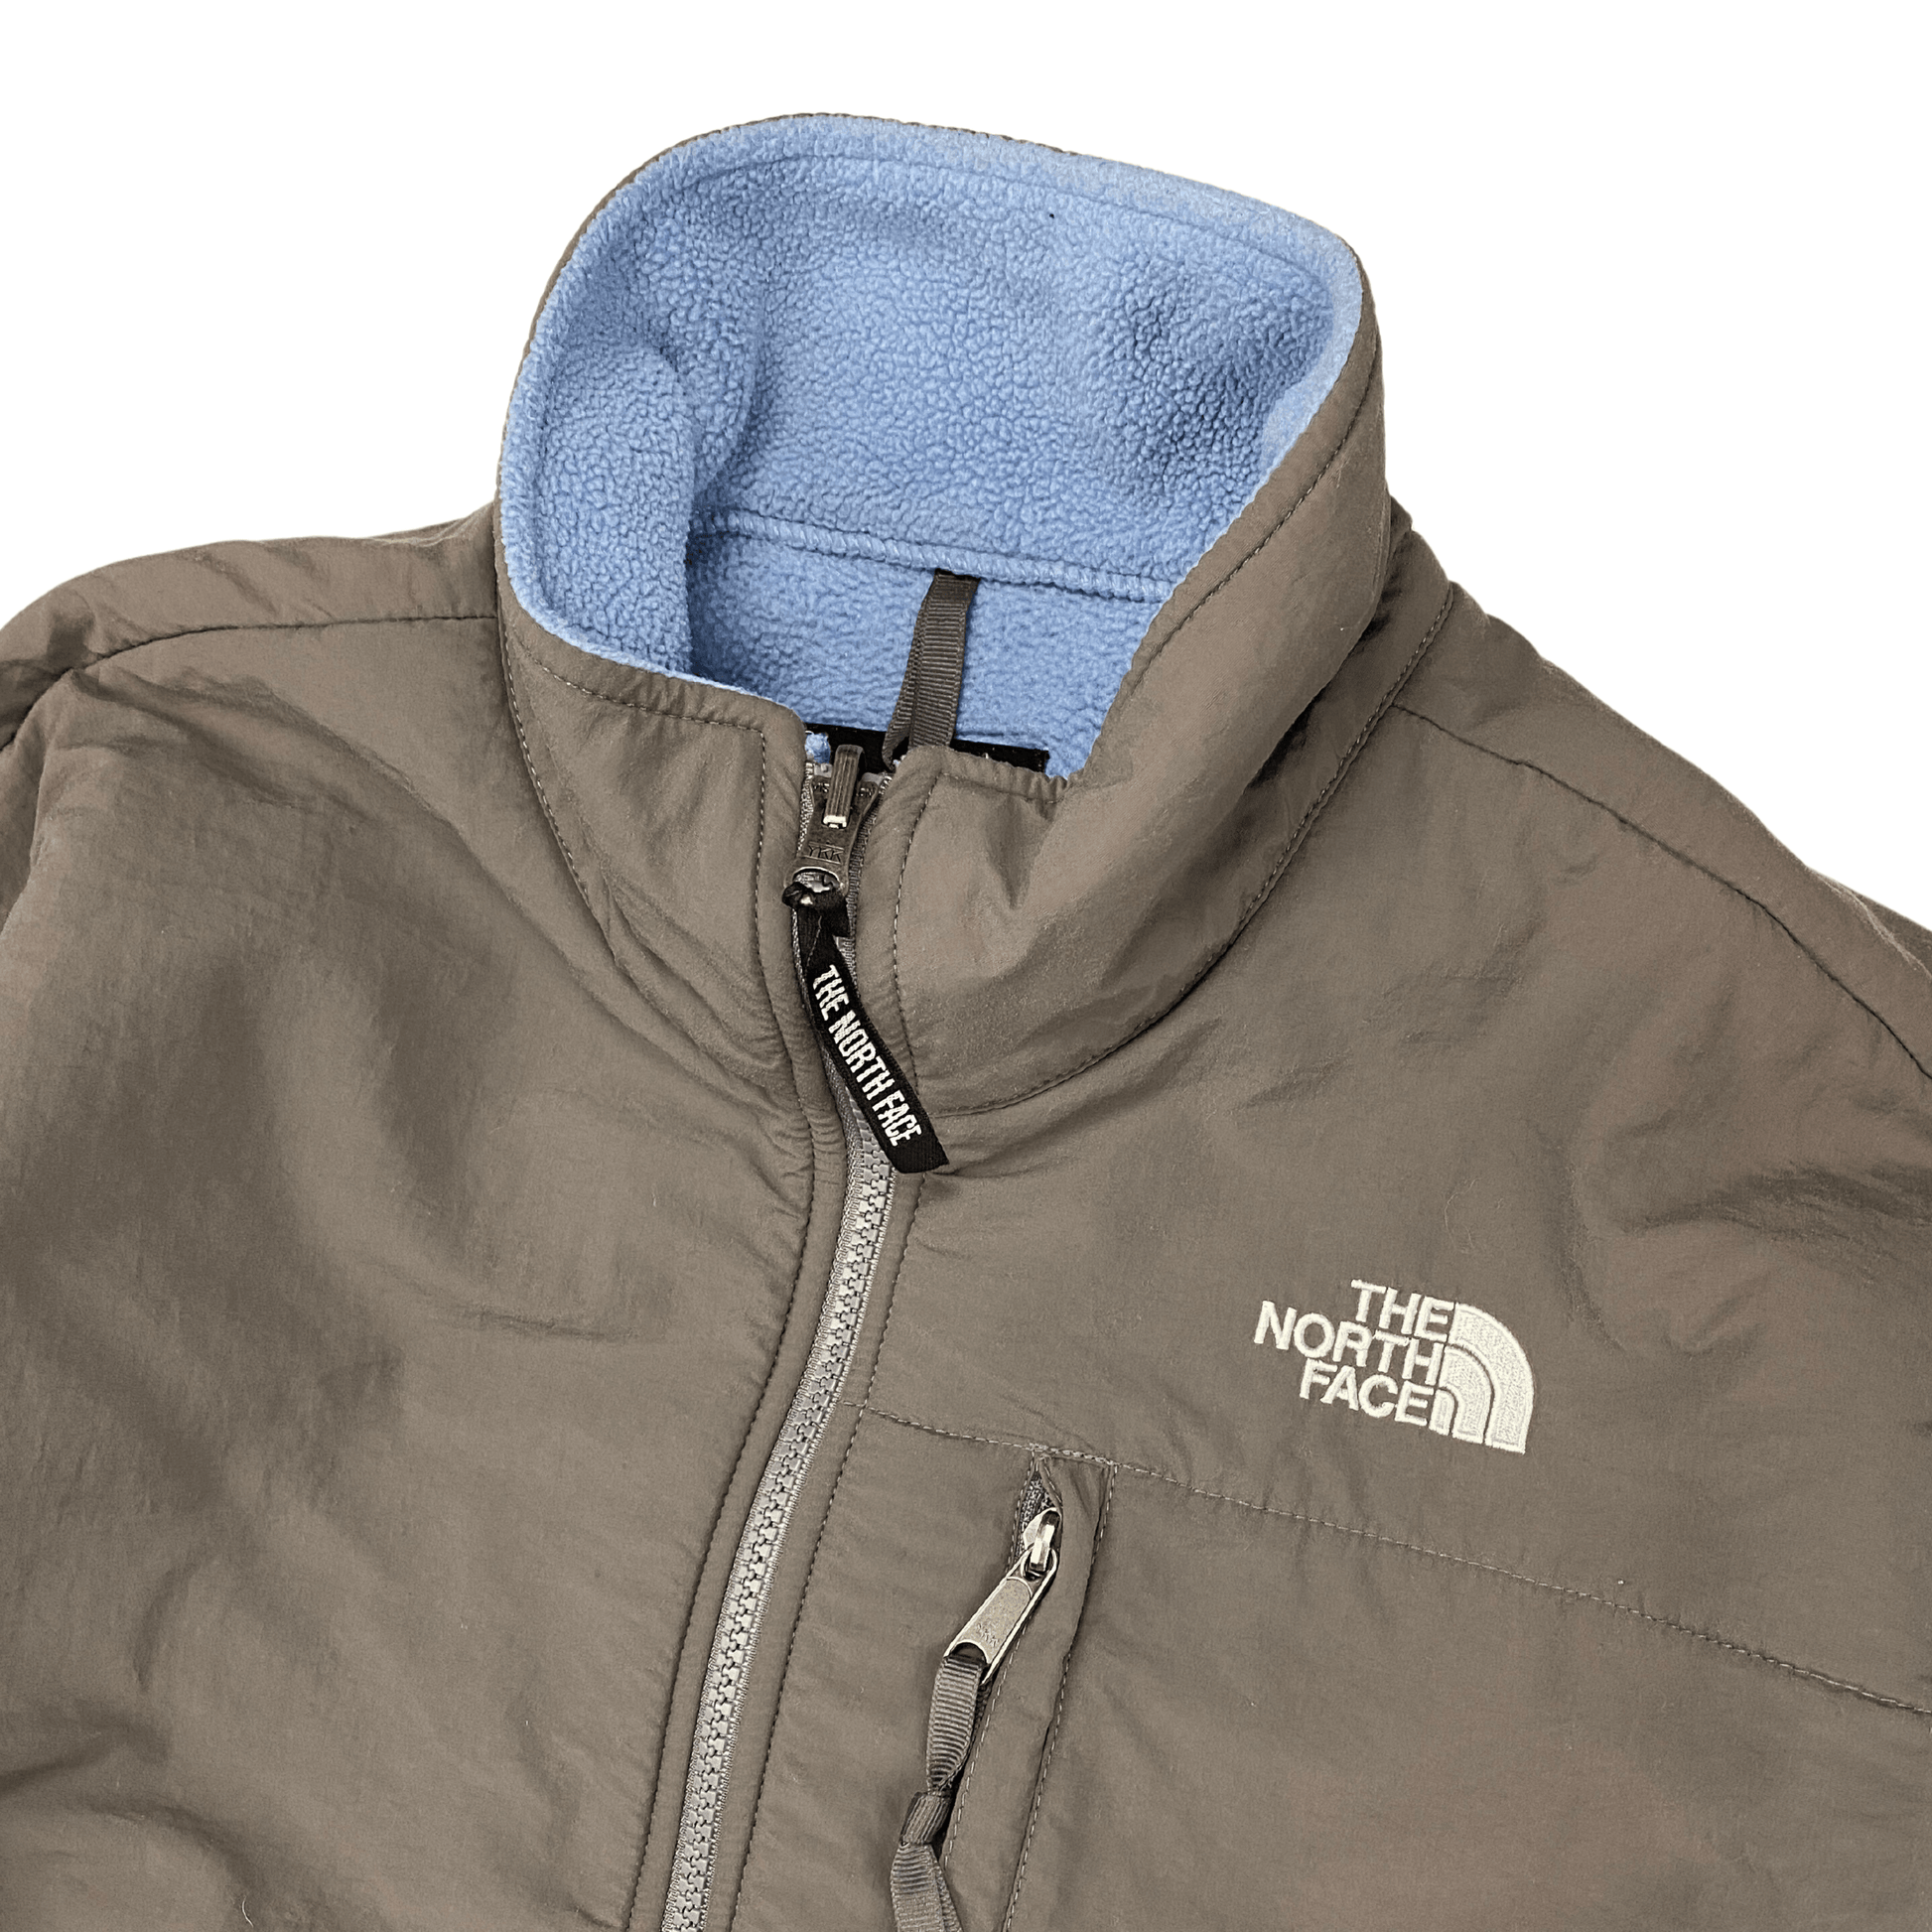 THE NORTH FACE DENALI LILAC (M/L) - Known Source